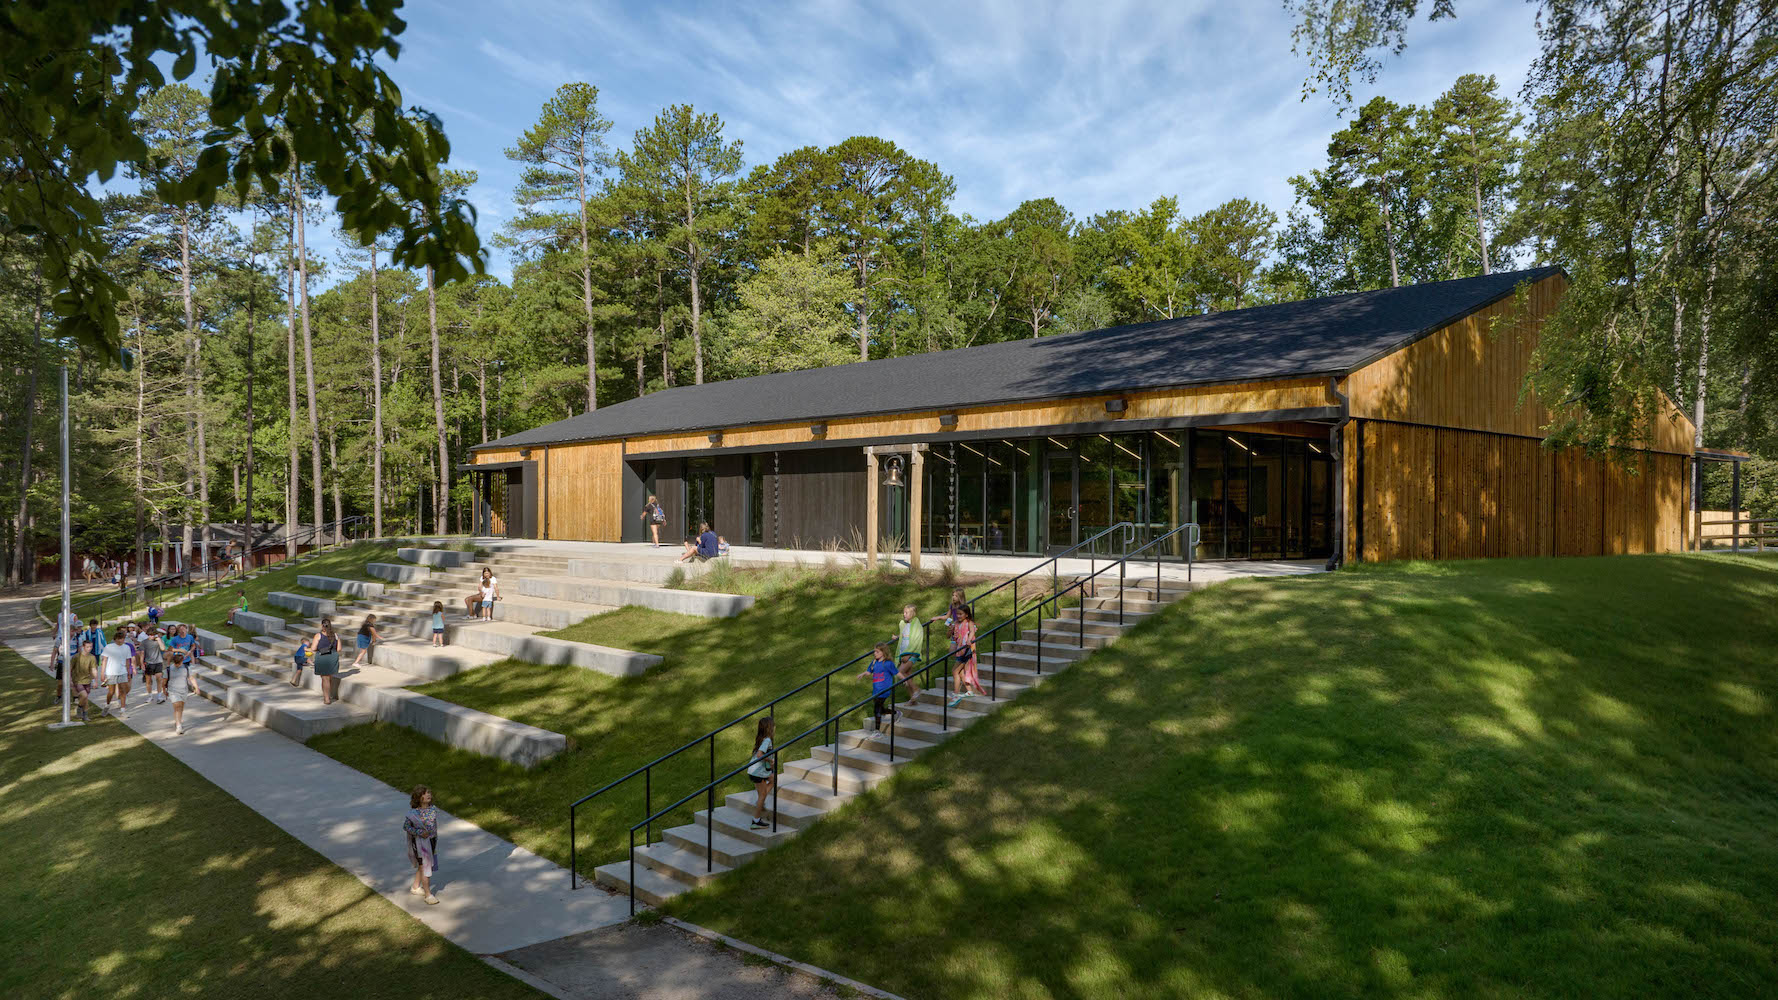 In North Carolina, a Modern Take on the Summer Camp Dining Hall With Plenty of Rustic Appeal